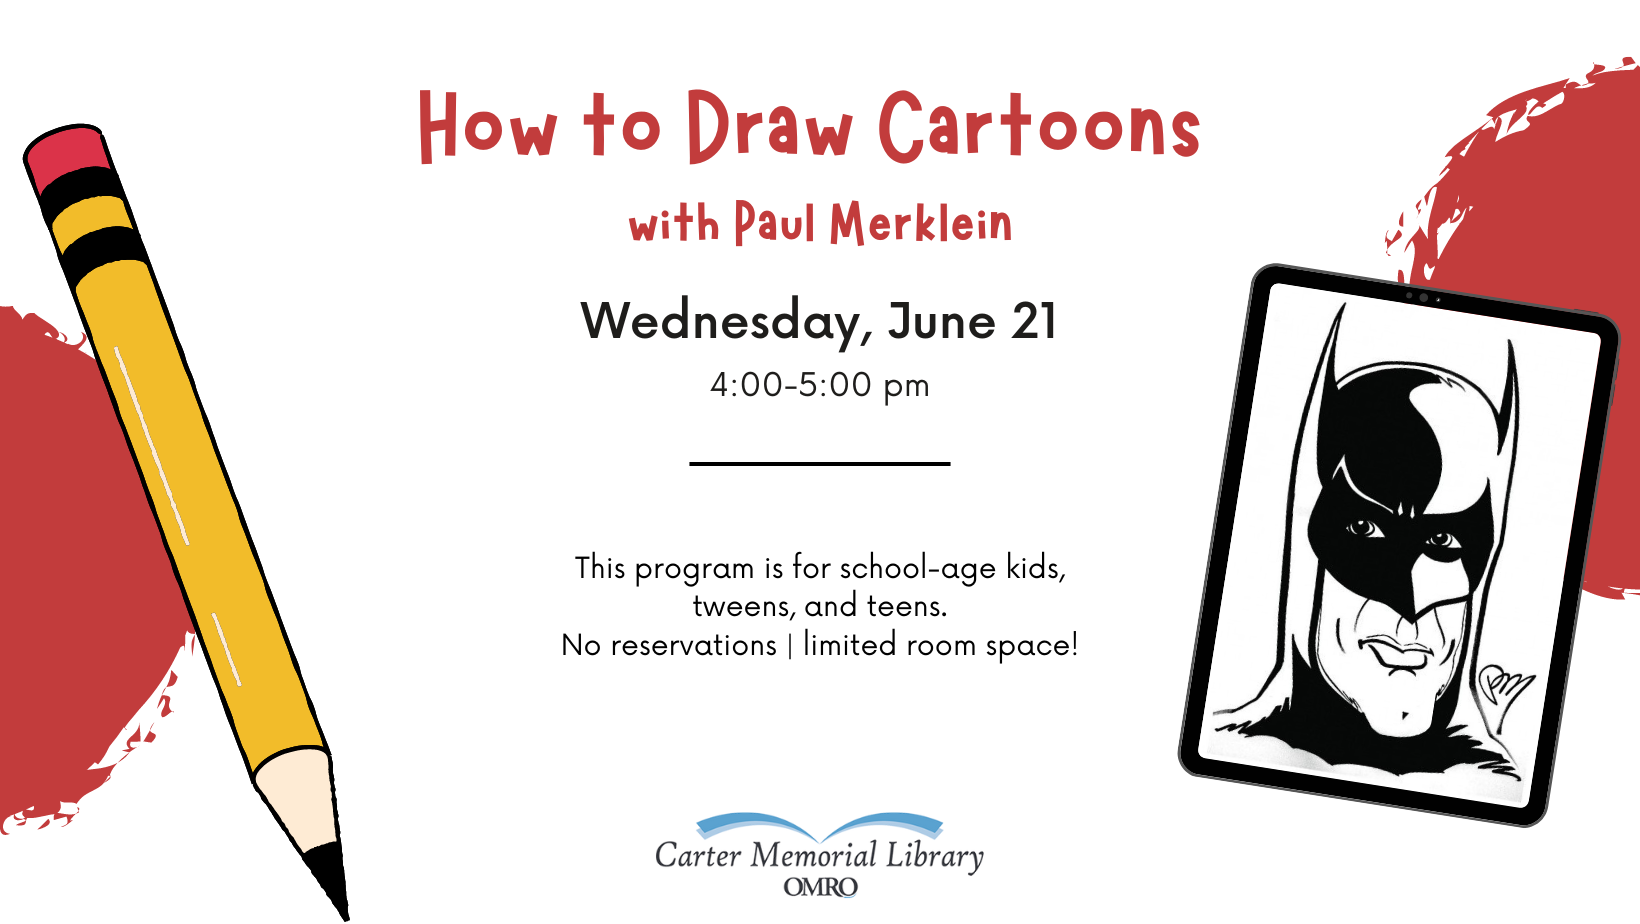 How to Draw Cartoons poster